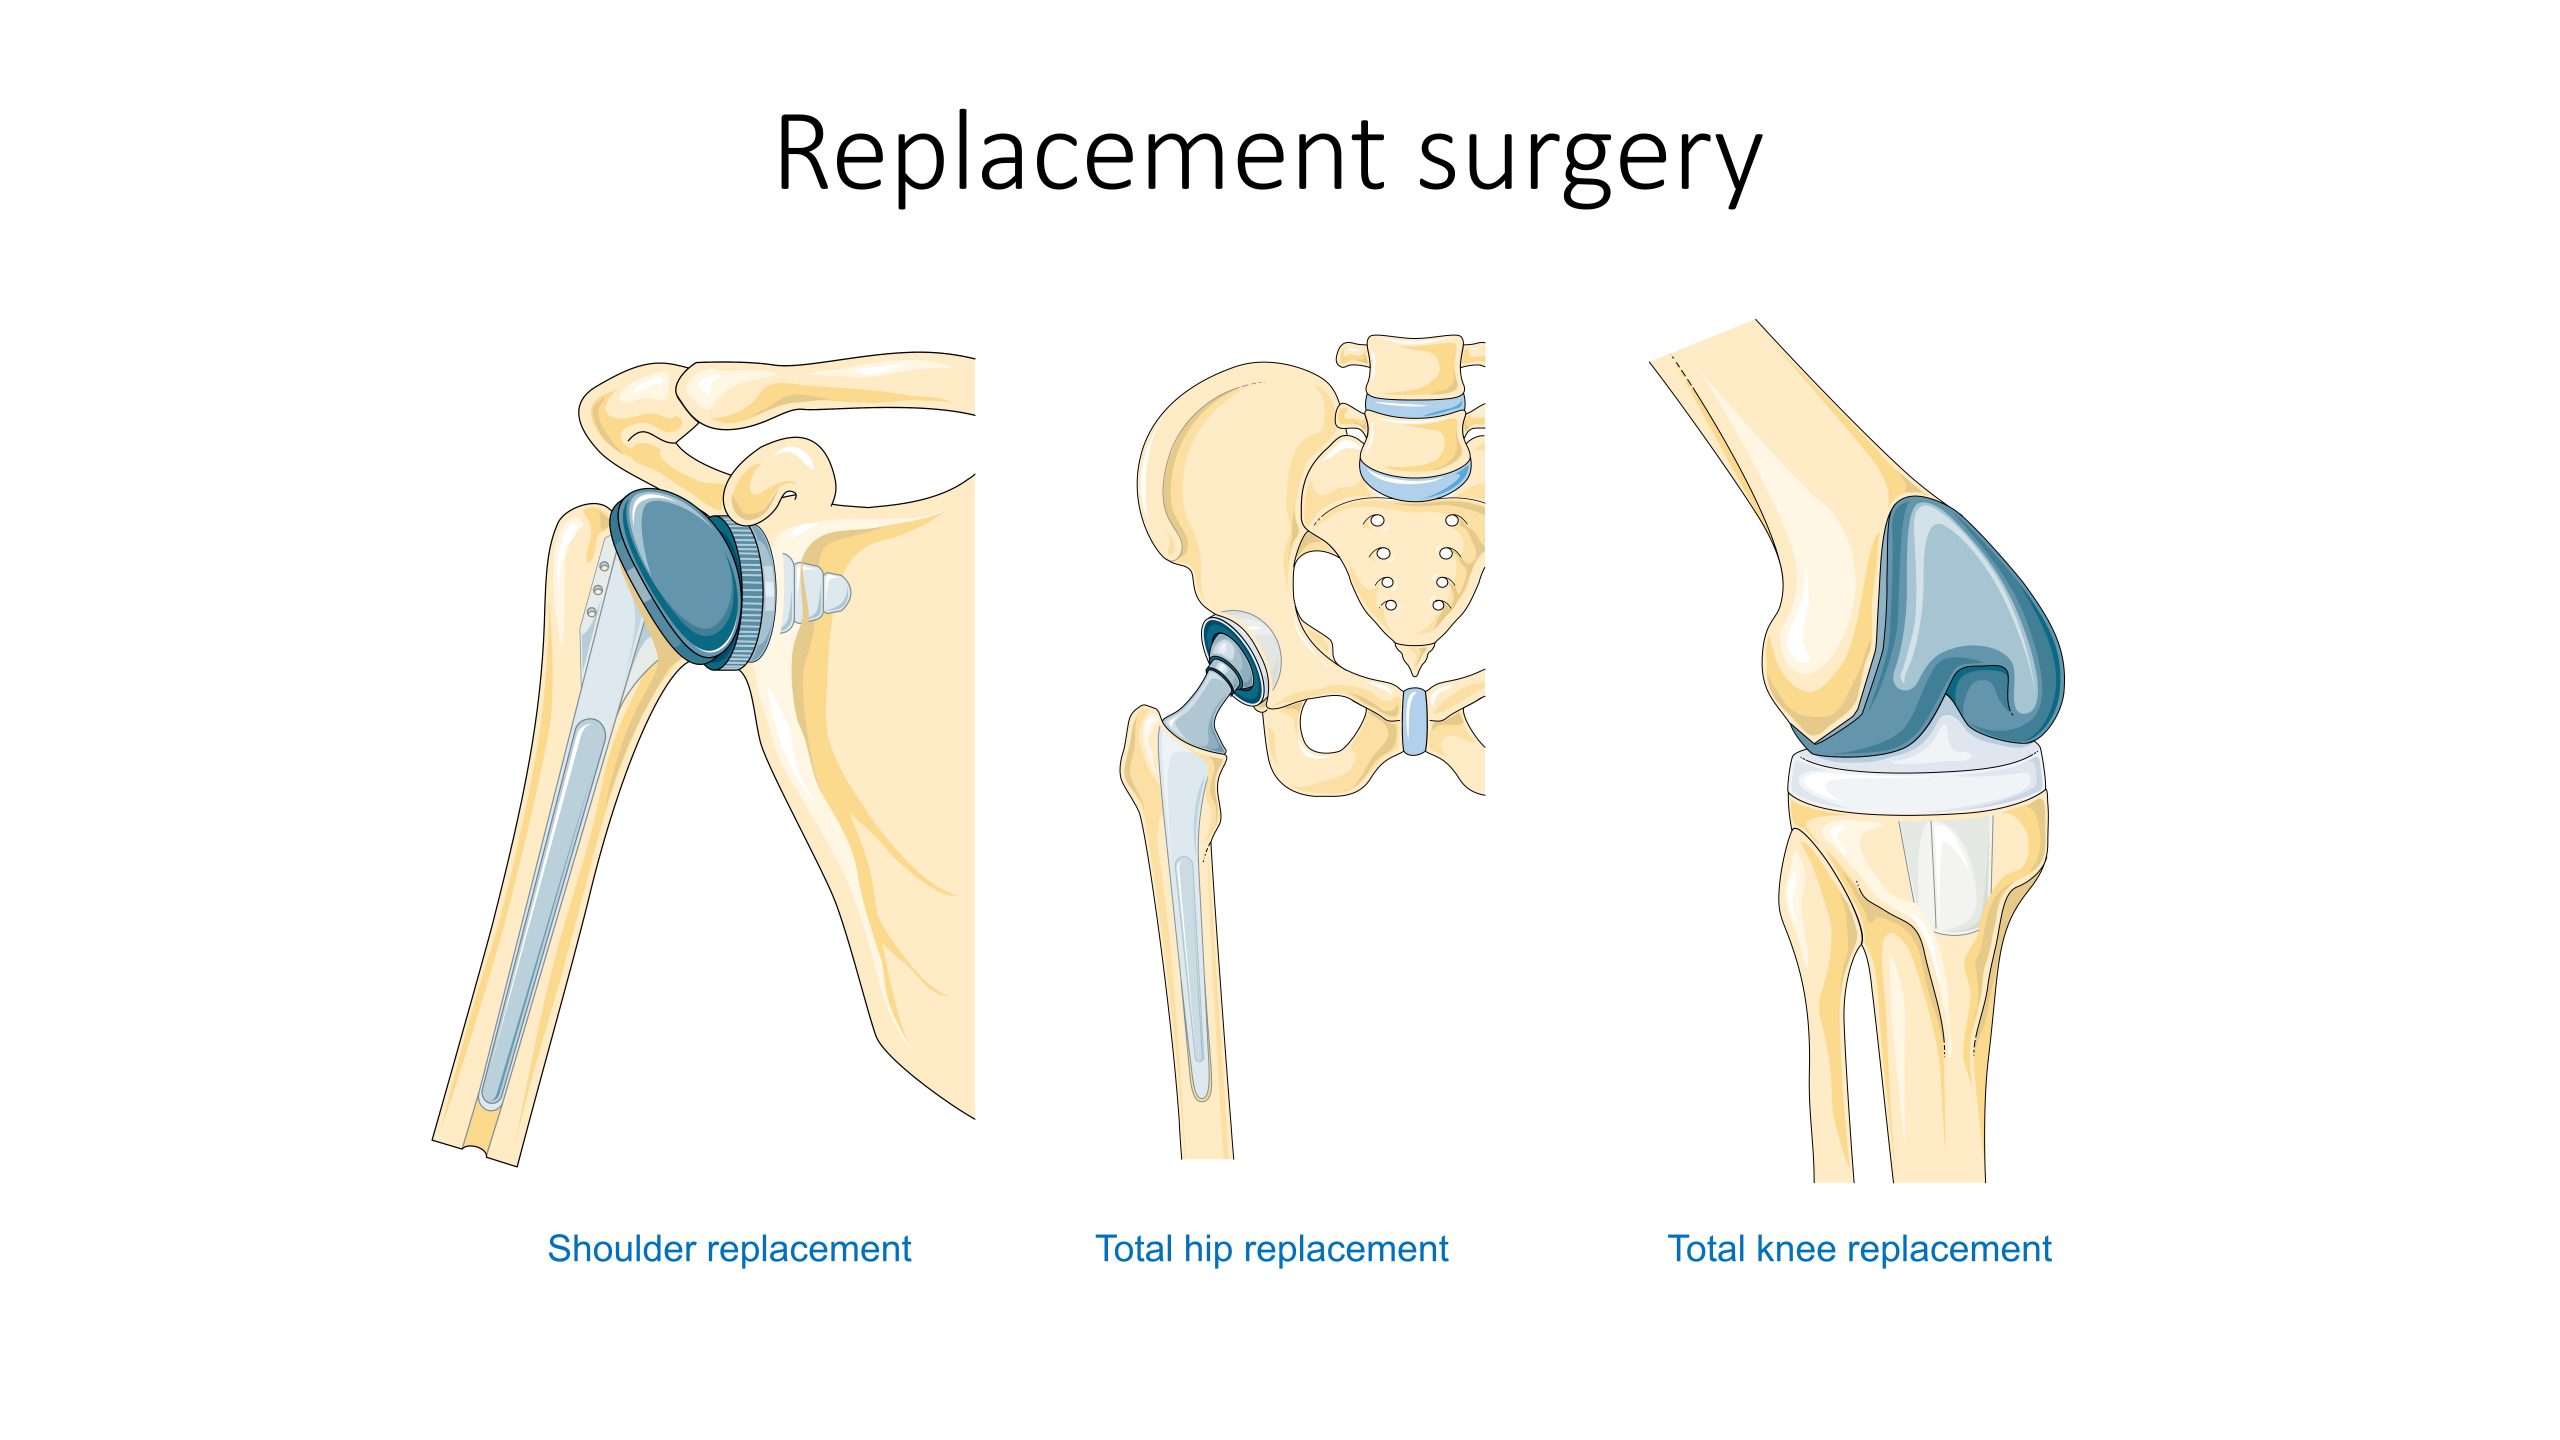 Illustration showing shoulder, hip, and knee replacements